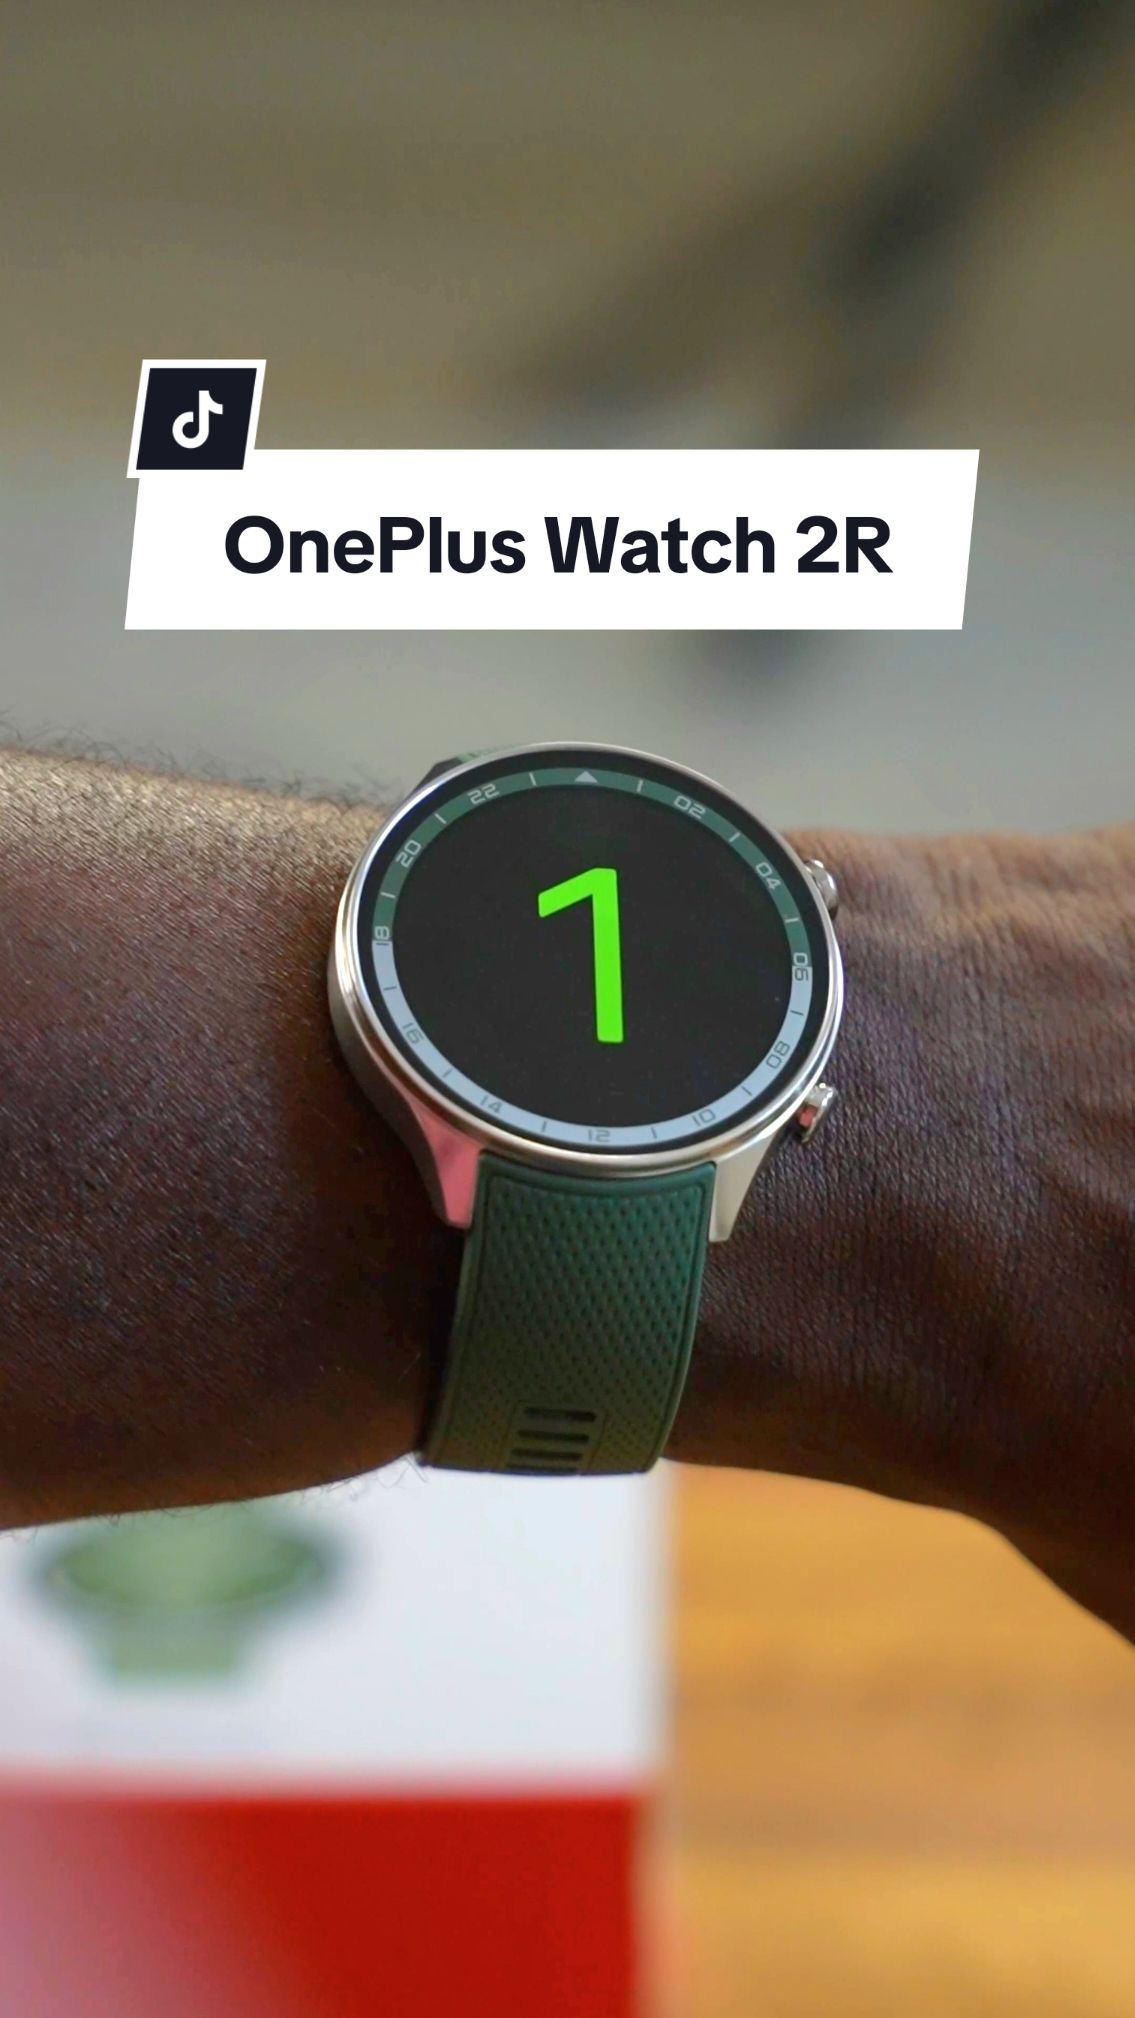 the new #oneplus #watch2r #unboxing #smartwatch #applewatch #foryou #foryoupage #booredatwork 